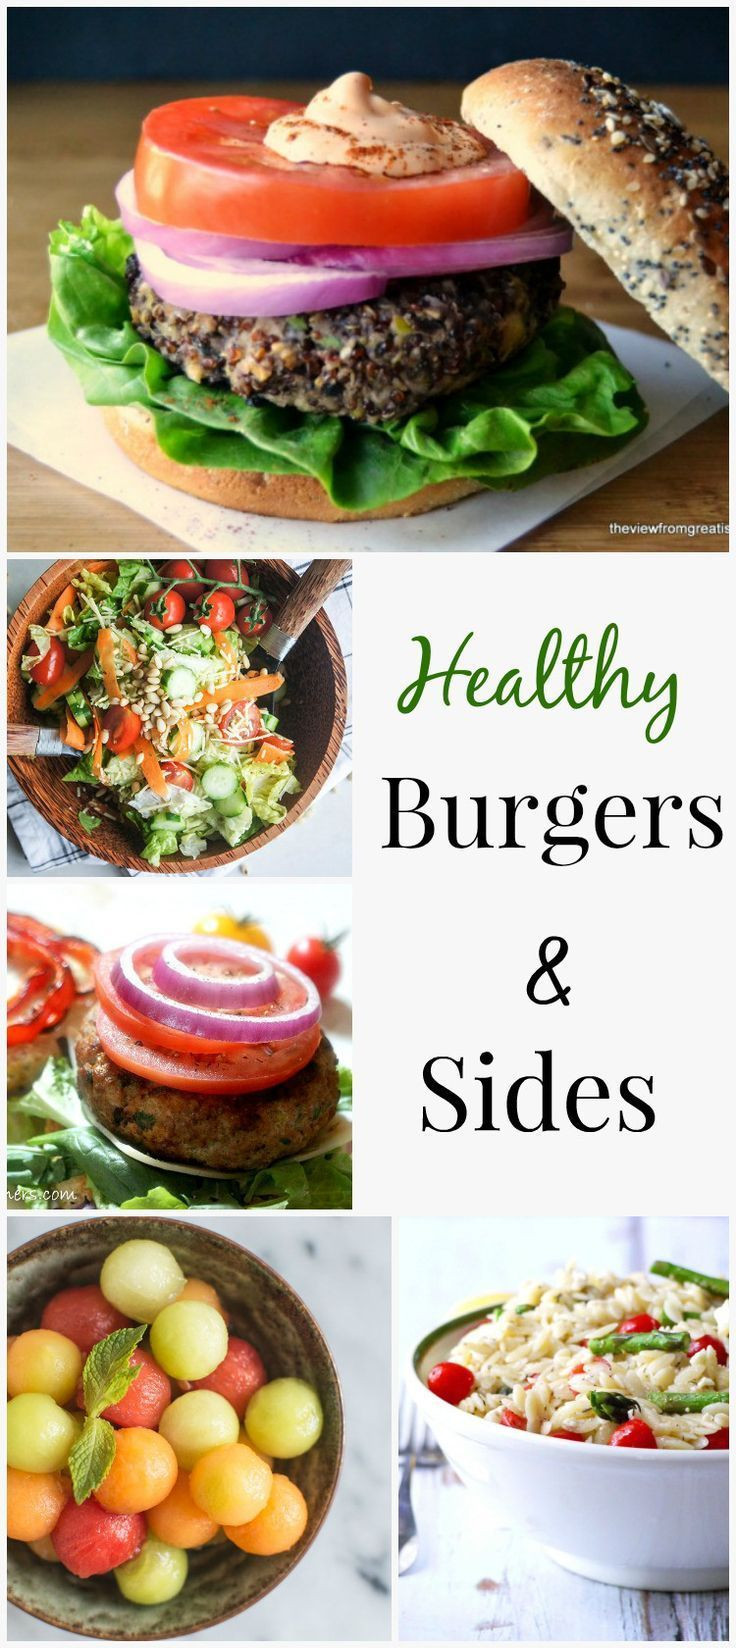 Healthy Side Dishes For Burgers
 Healthy Burgers & Sides